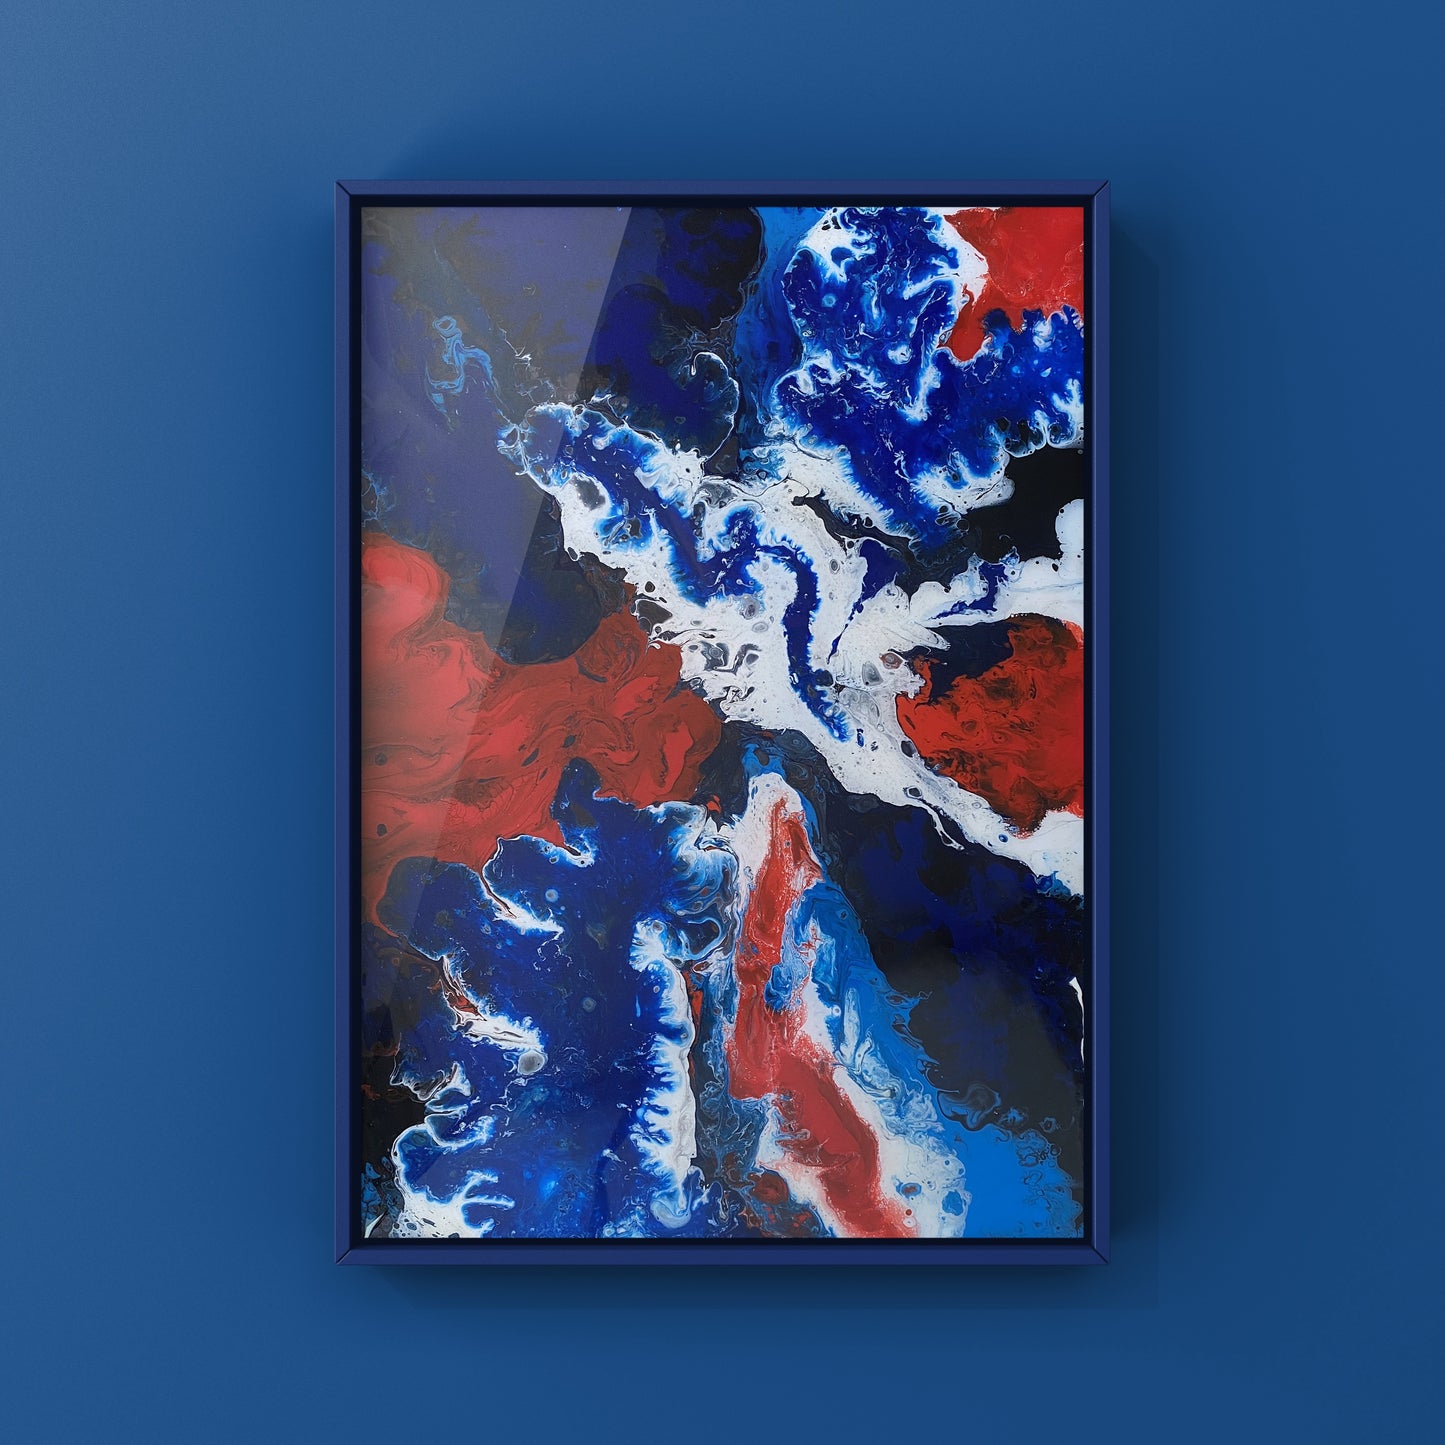 union jack painting on a navy blue background in a navy frame